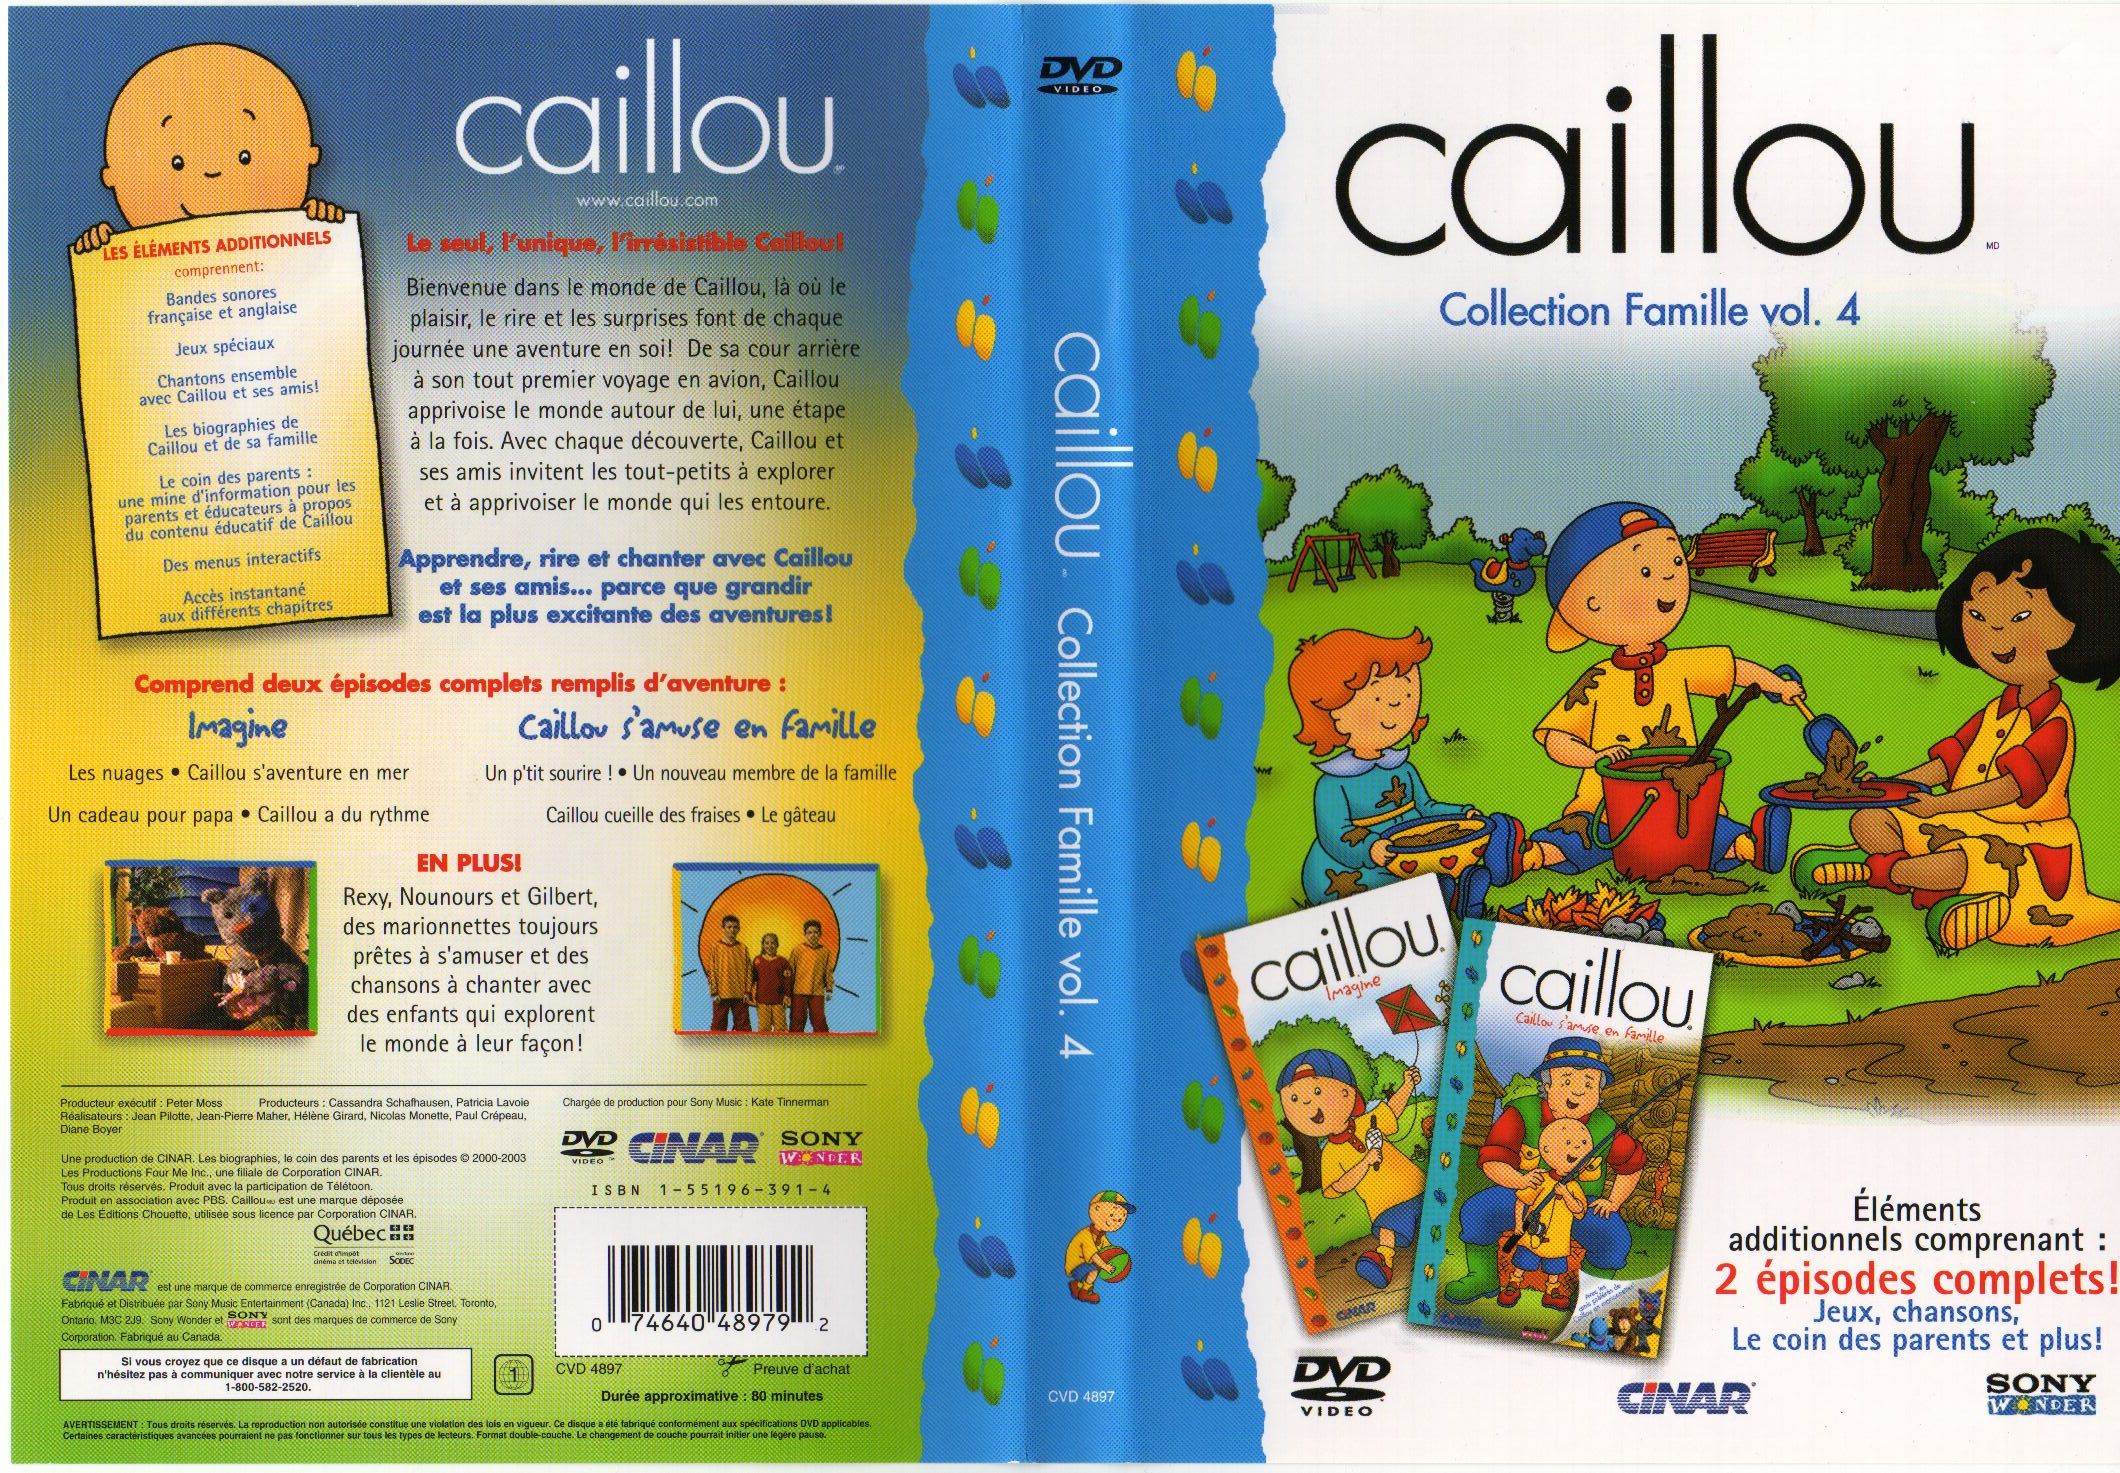 Jaquette DVD Caillou collection famille vol 4